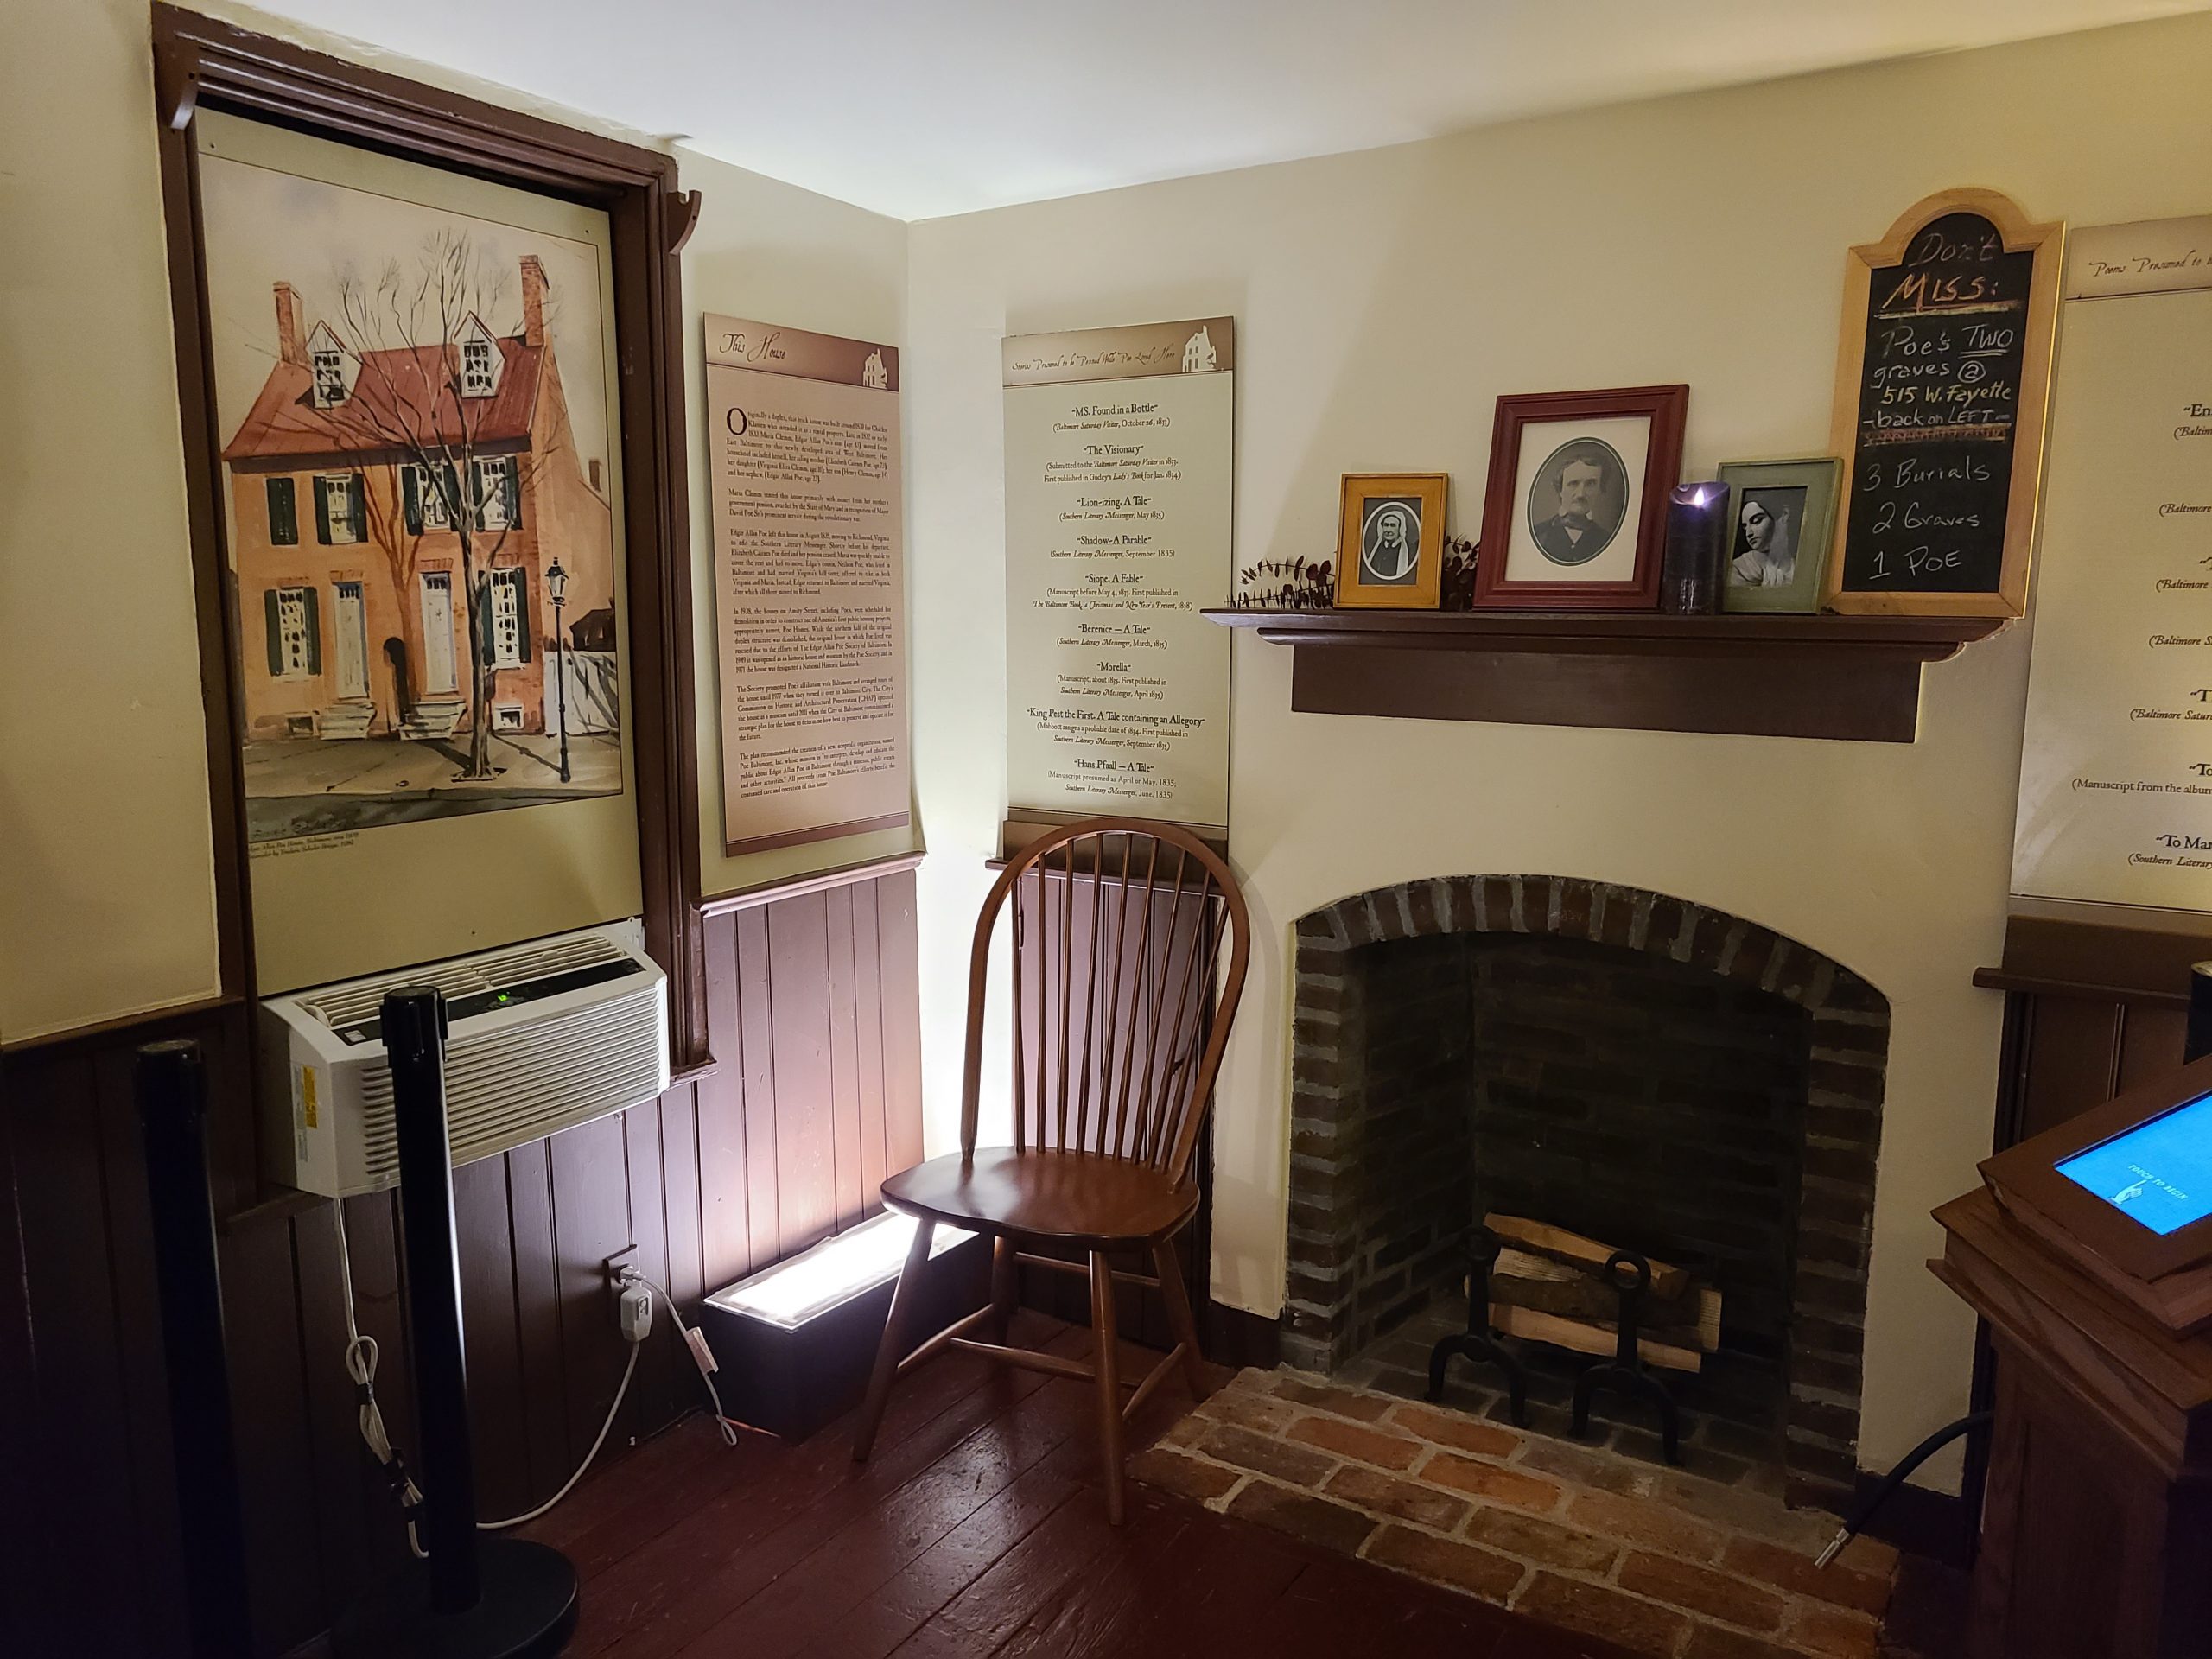 A sitting area in the Edgar Allan Poe house